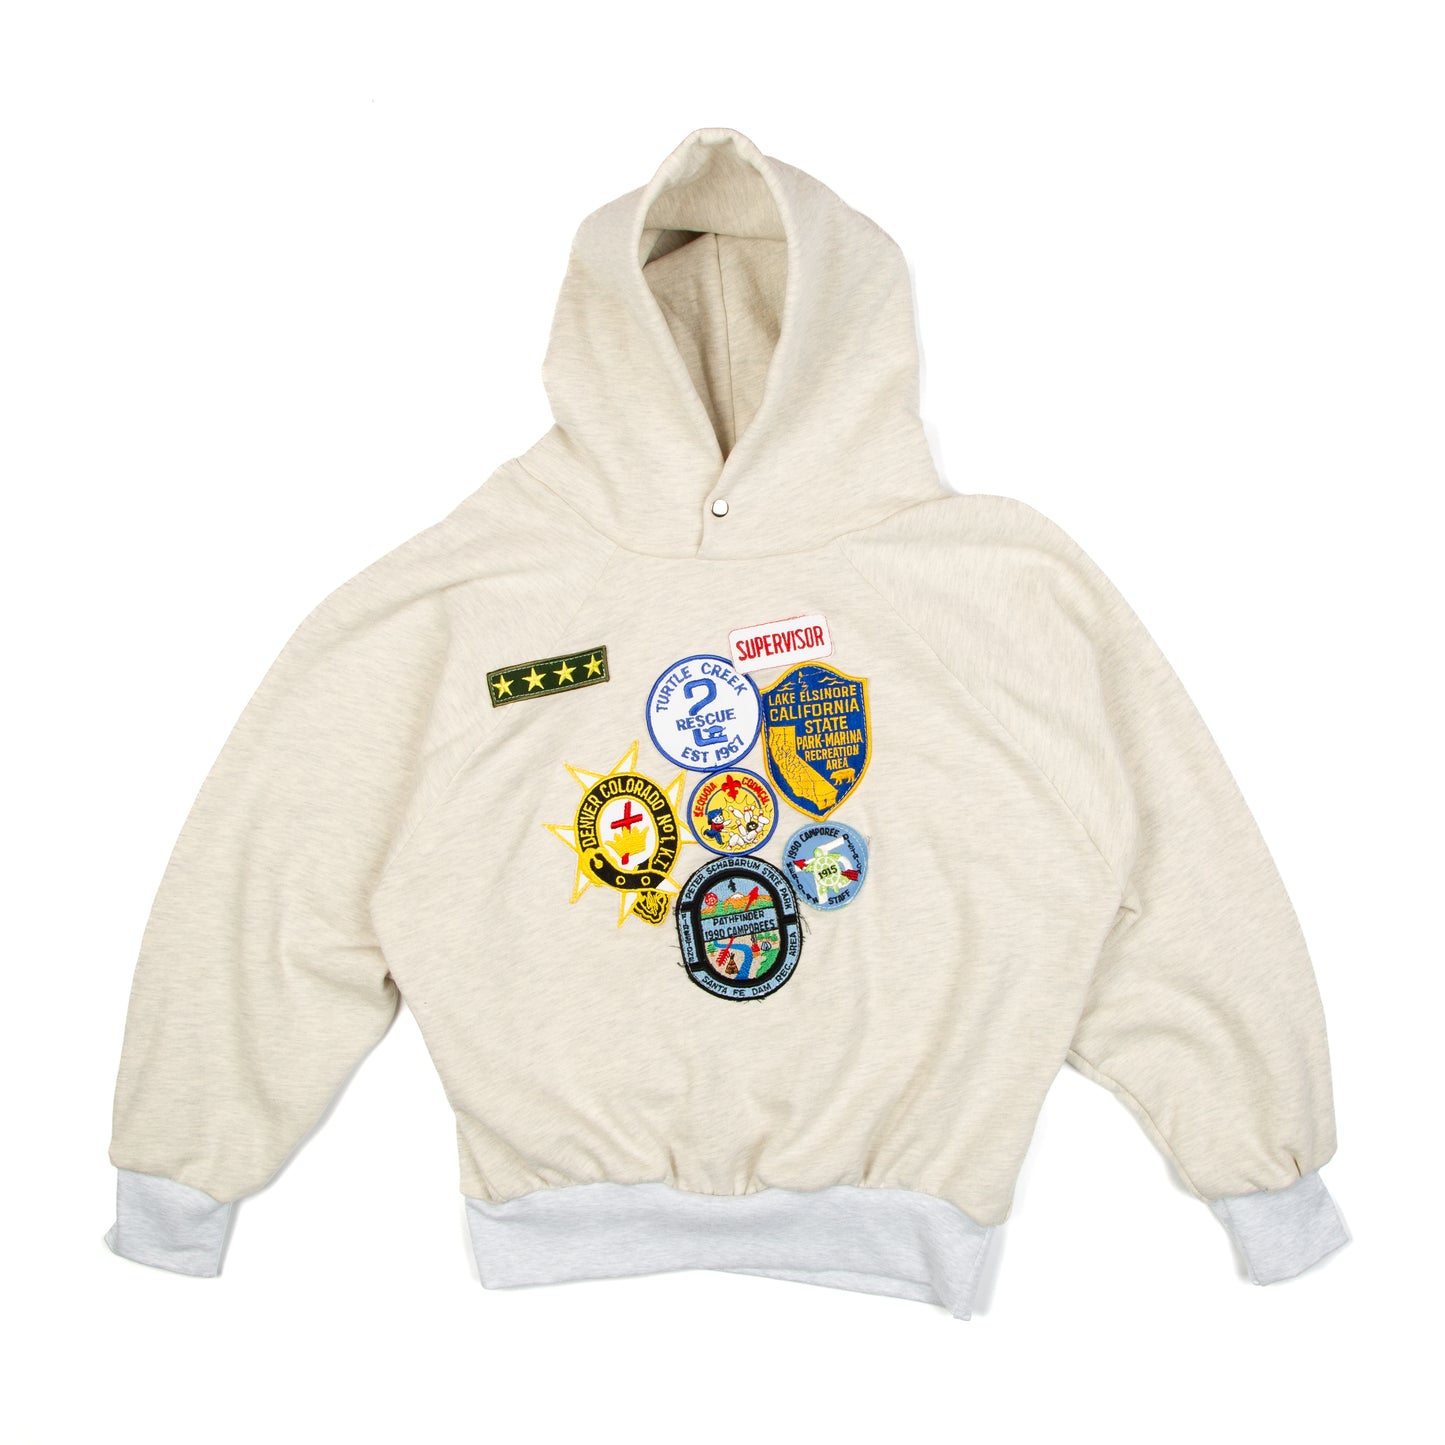 "04 PATCH' Hoodie